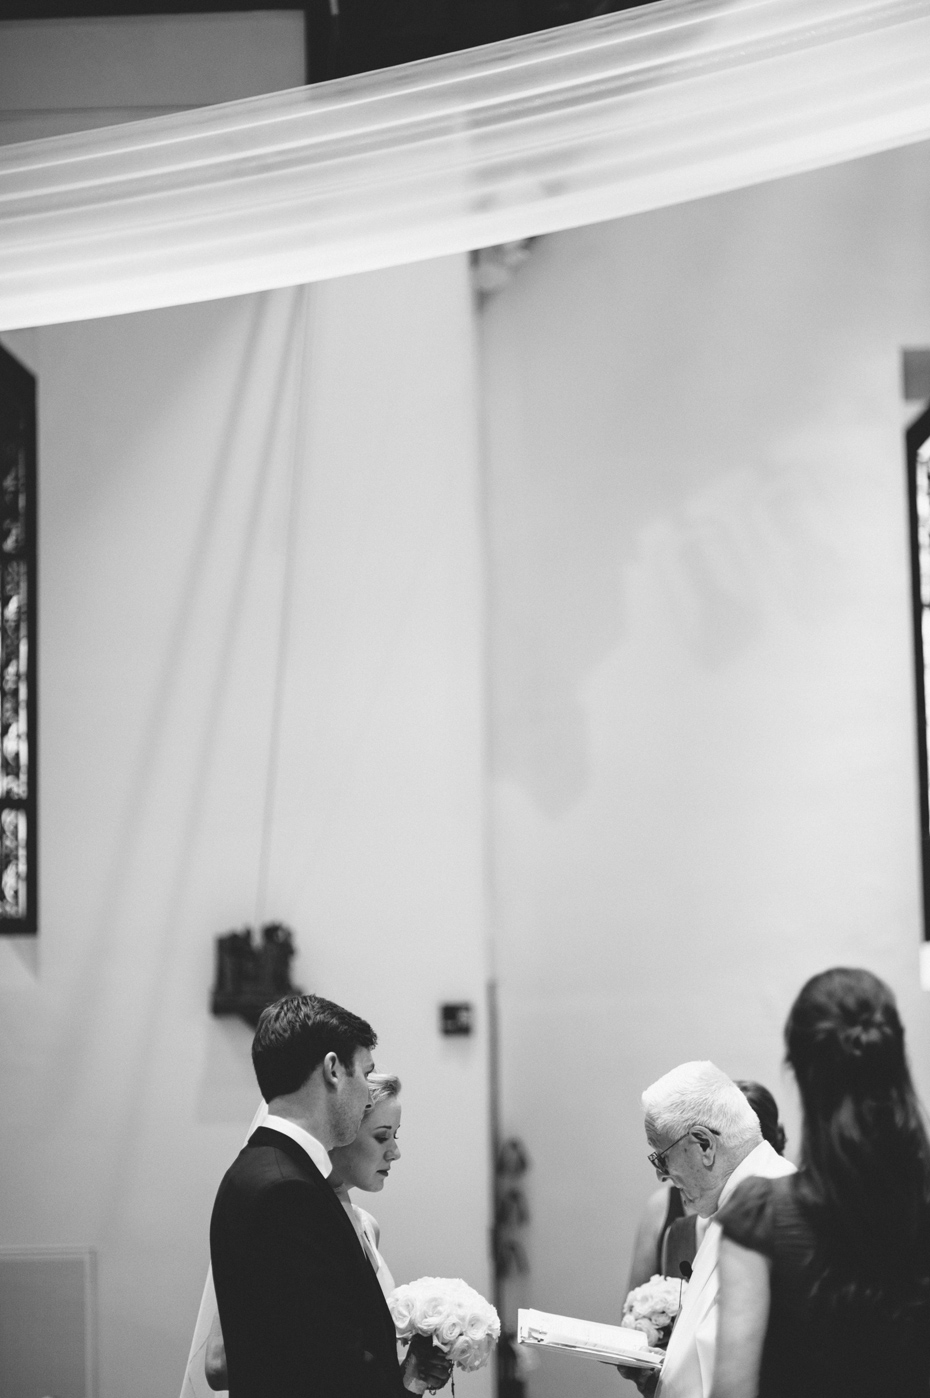 A bride and groom during their wedding at Saint Mary's Student Parish in Ann Arbor, shot by wedding photographer Heather Jowett